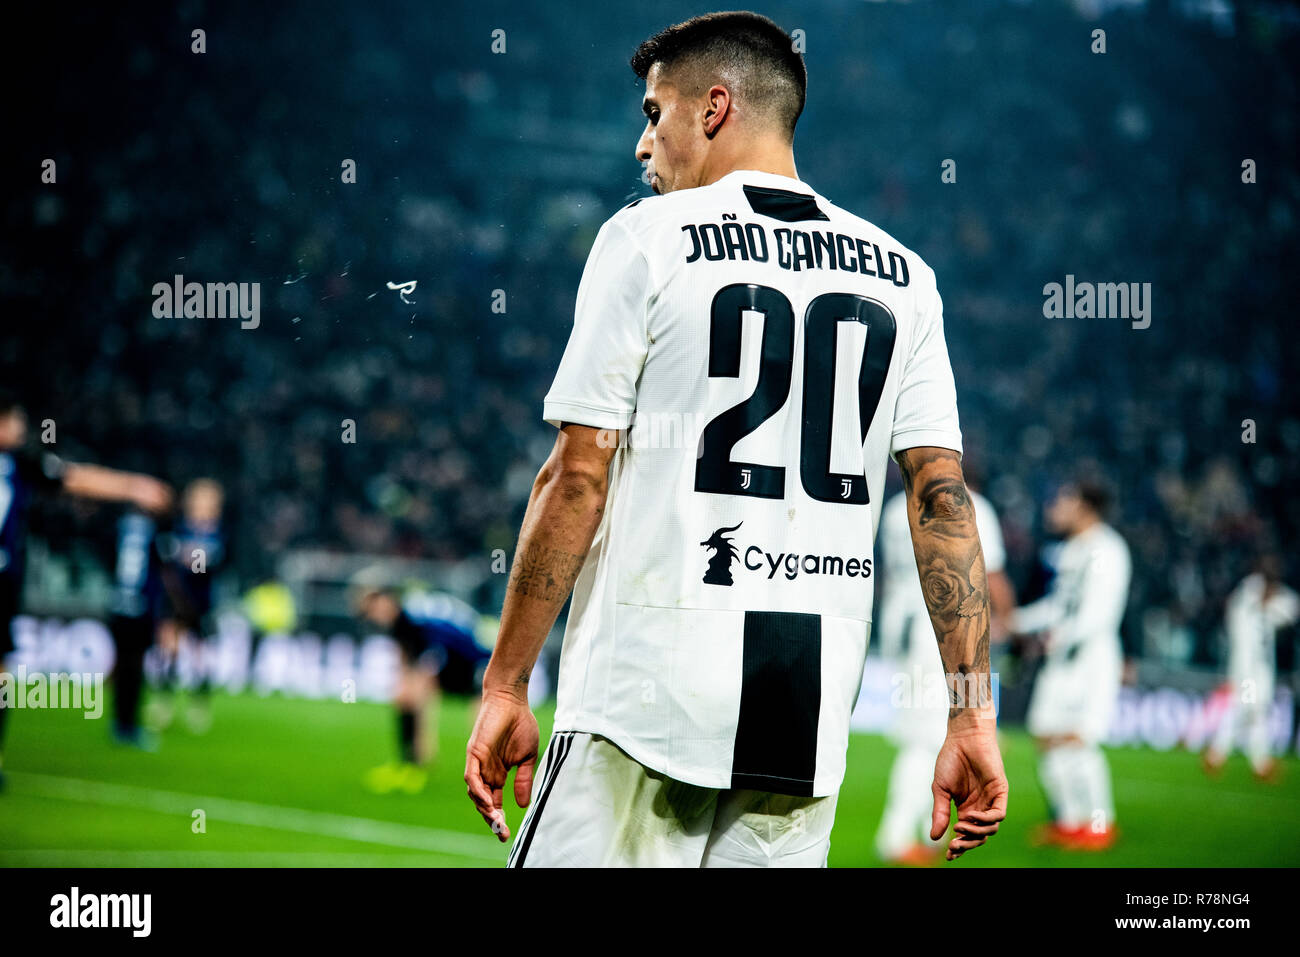 Cancelo High Resolution Stock Photography And Image